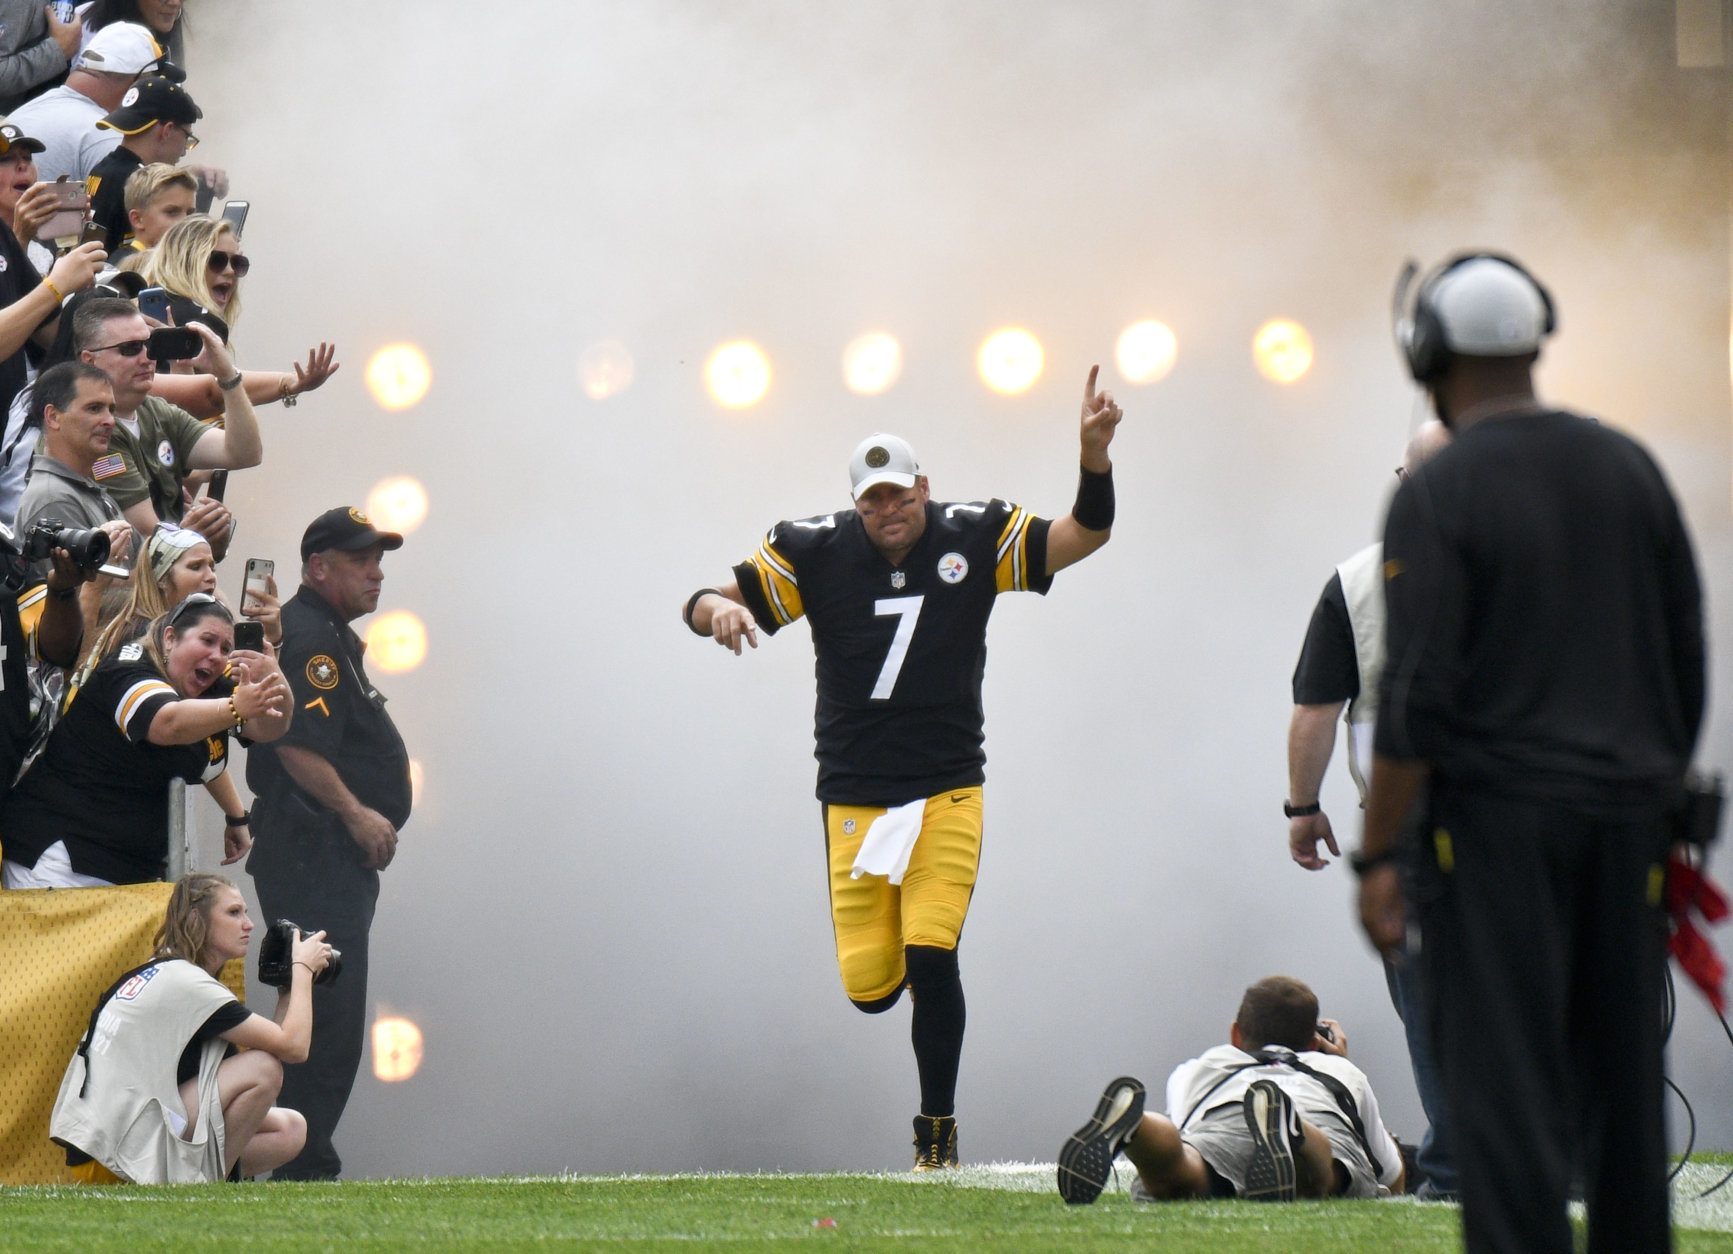 In this photo from Aug. 25, 2018, Pittsburgh Steelers quarterback Ben Roethlisberger (7) takes the field as fans and head coach Mike Tomlin, right, watch before an NFL preseason football game against the Tennessee Titans in Pittsburgh. Roethlisberger feels rejuvenated entering his 15th season. Yet even as he considers extending his career beyond 2019, he is well aware that time is of the essence for the two-time defending AFC North champions.(AP Photo/Don Wright)